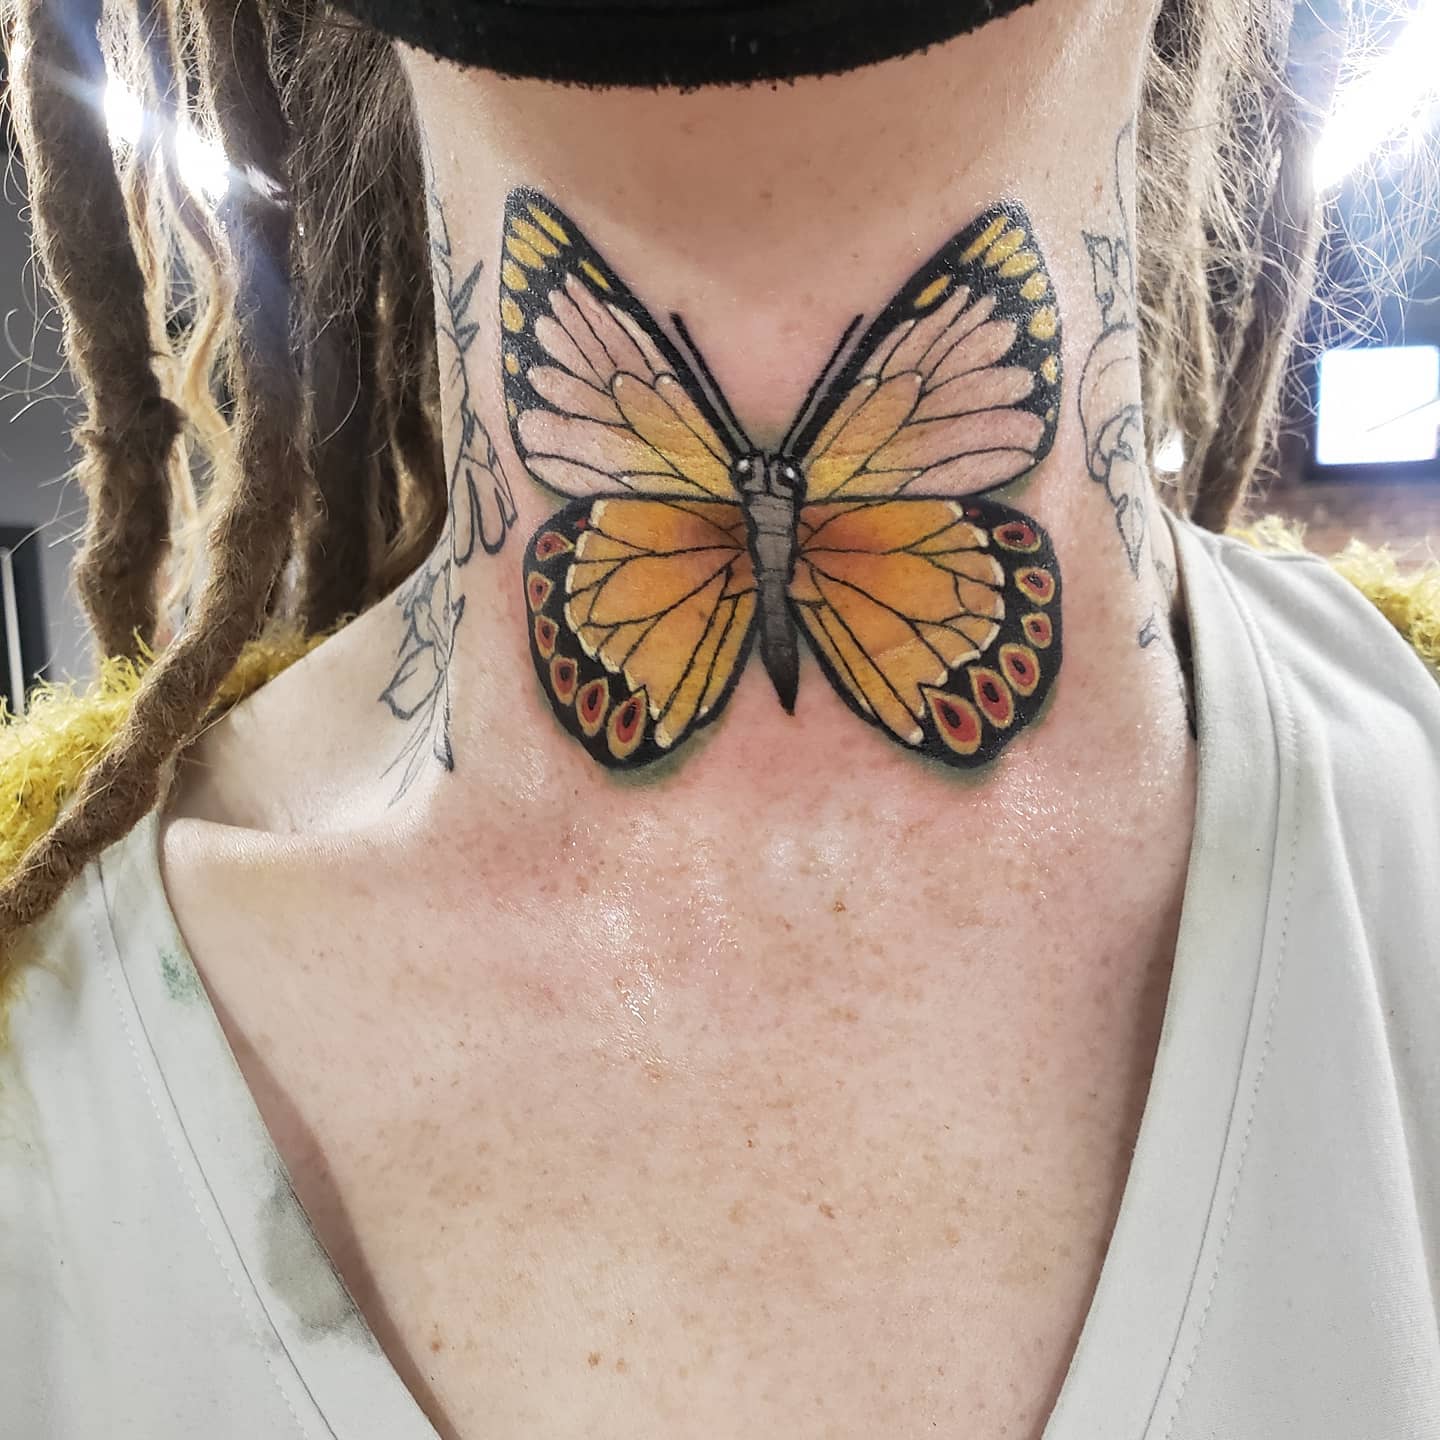 Woman receiving butterfly tattoo at her neck stock photo